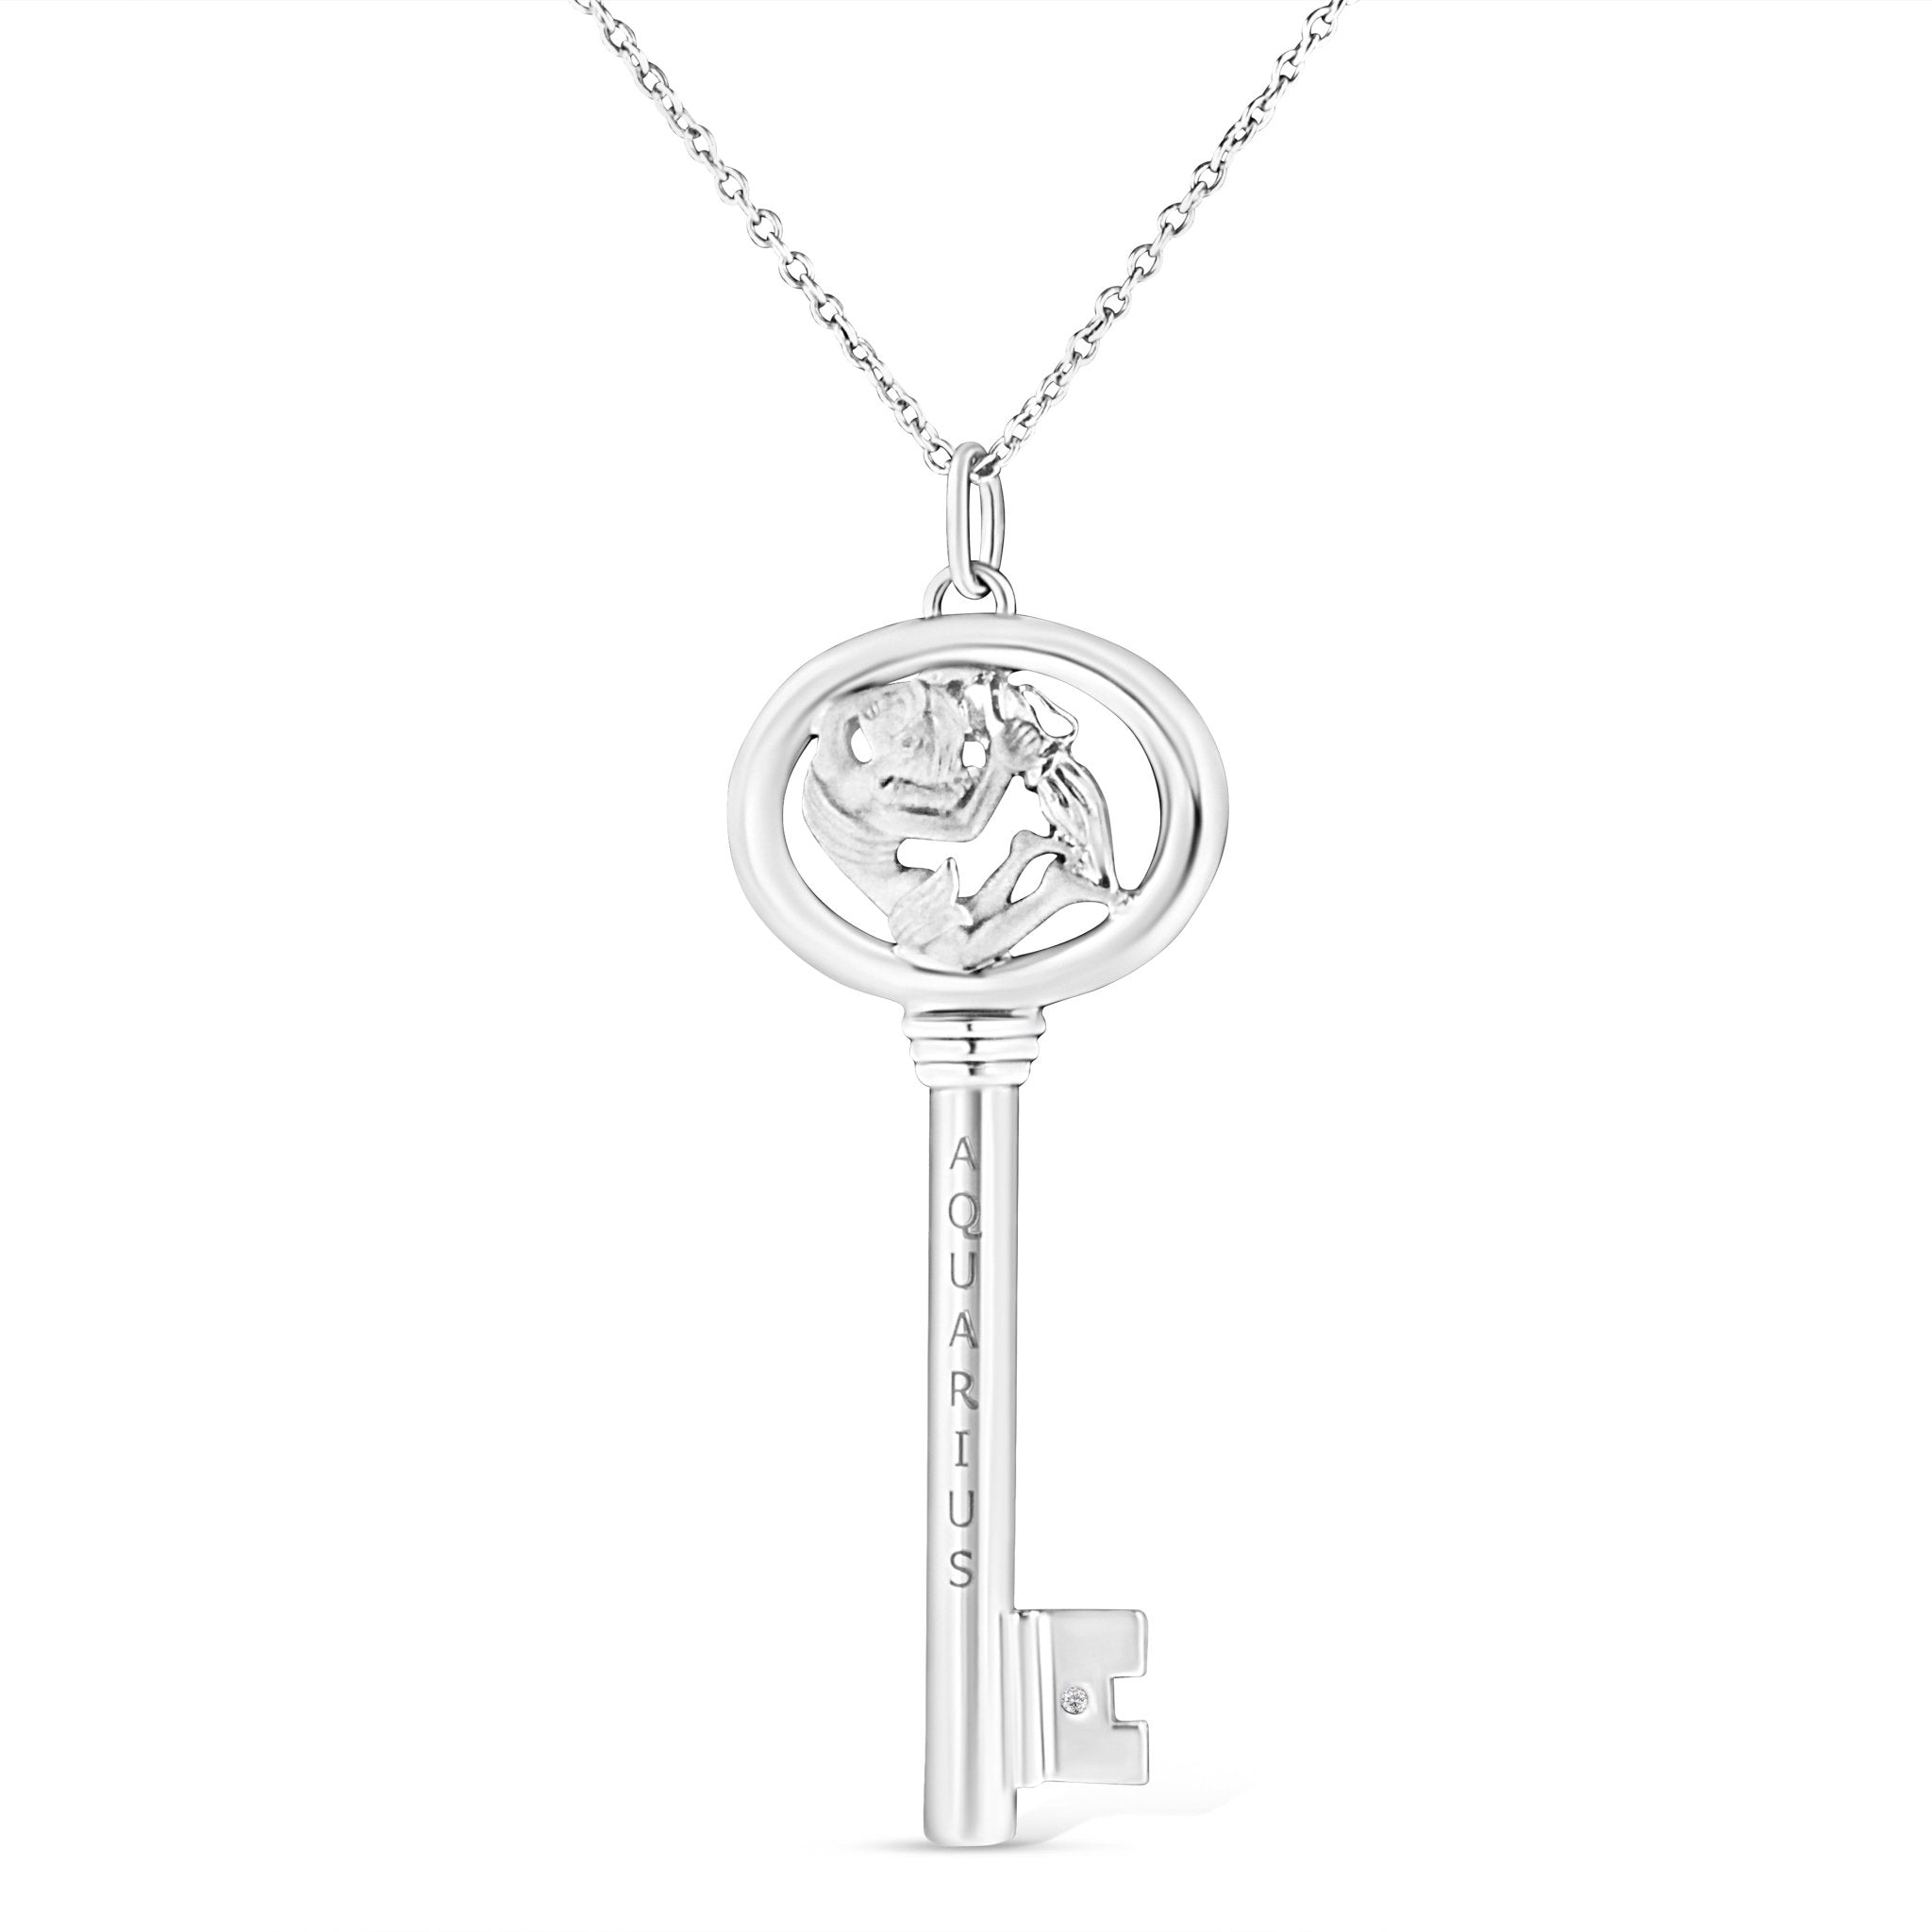 .925 Sterling Silver Diamond Accent Aquarius Zodiac Key 18" Pendant Necklace (K-L Color, I1-I2 Clarity) - Tuesday Morning-Pendant Necklace